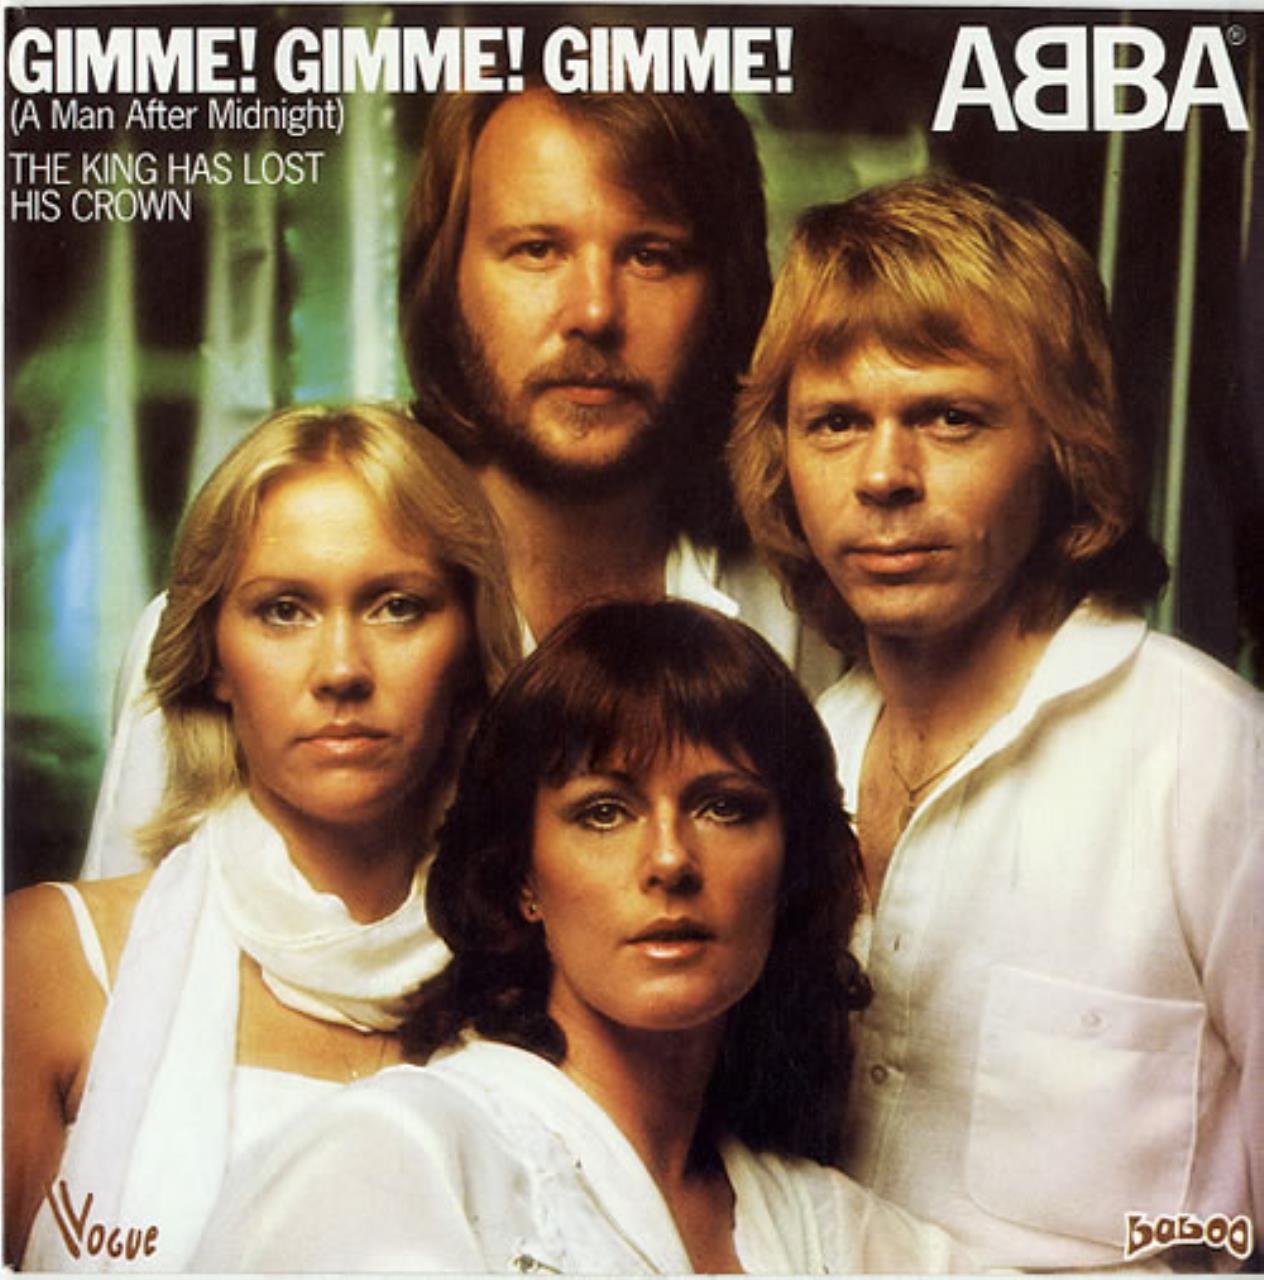 Abba - Gimme! Gimme! Gimme! (A Man After Midnight) mp3 download